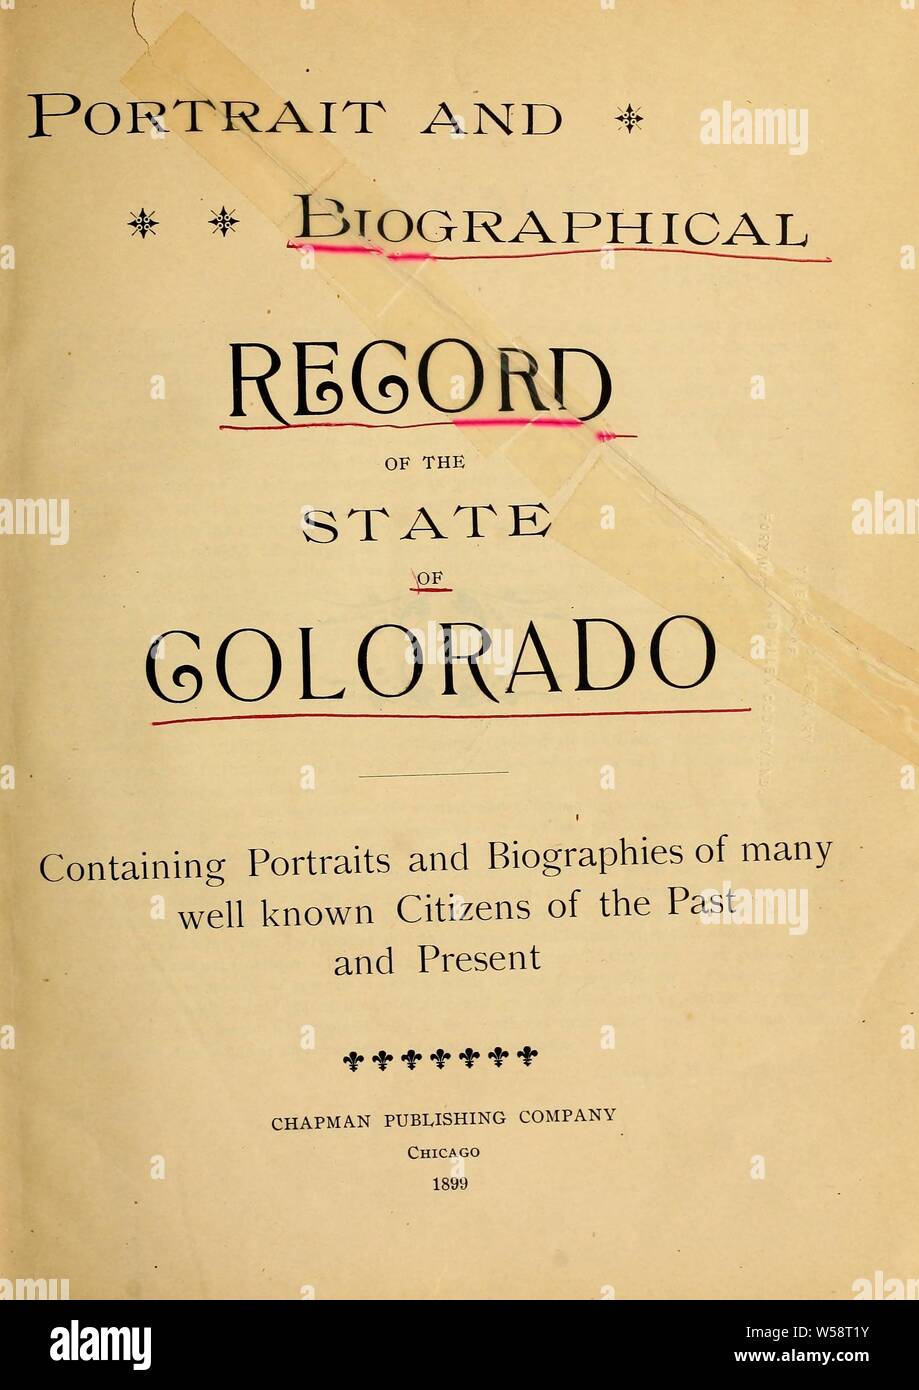 Portrait and biographical record of the state of Colorado, containing portraits and biographies of many well known citizens of the past and present : Chapman Publishing Company, Chicago, pub Stock Photo